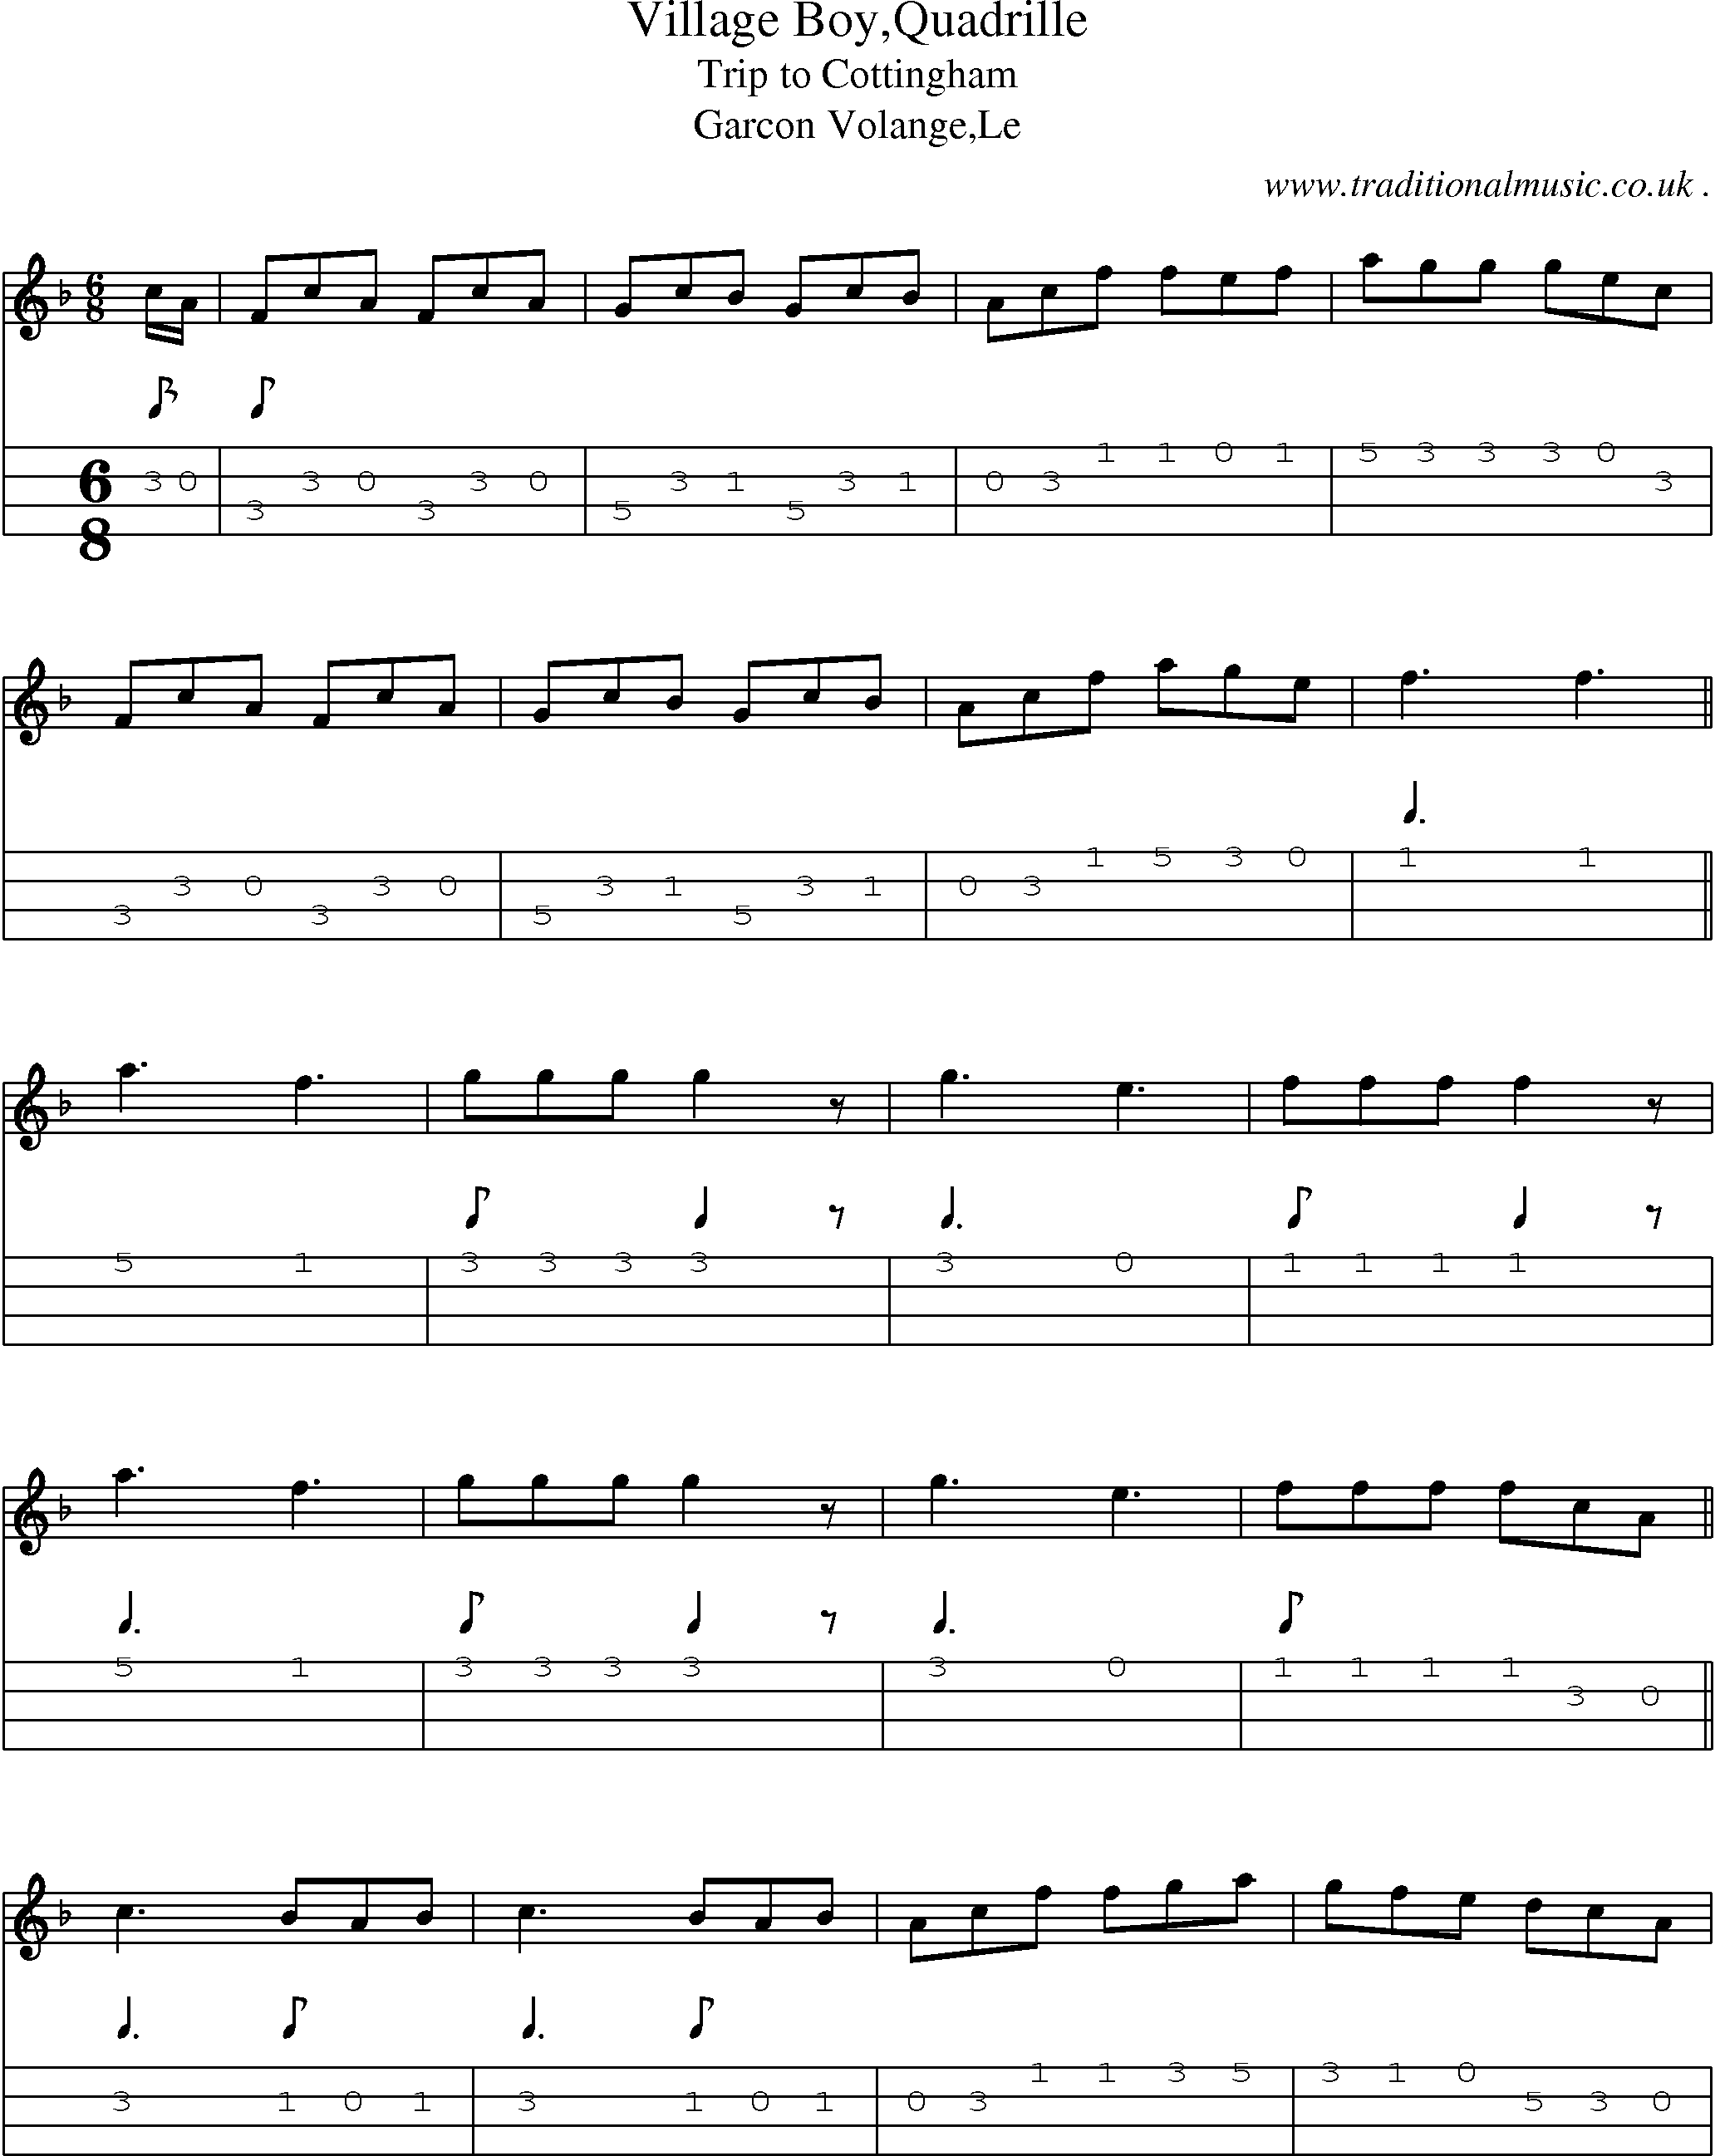 Sheet-Music and Mandolin Tabs for Village Boyquadrille